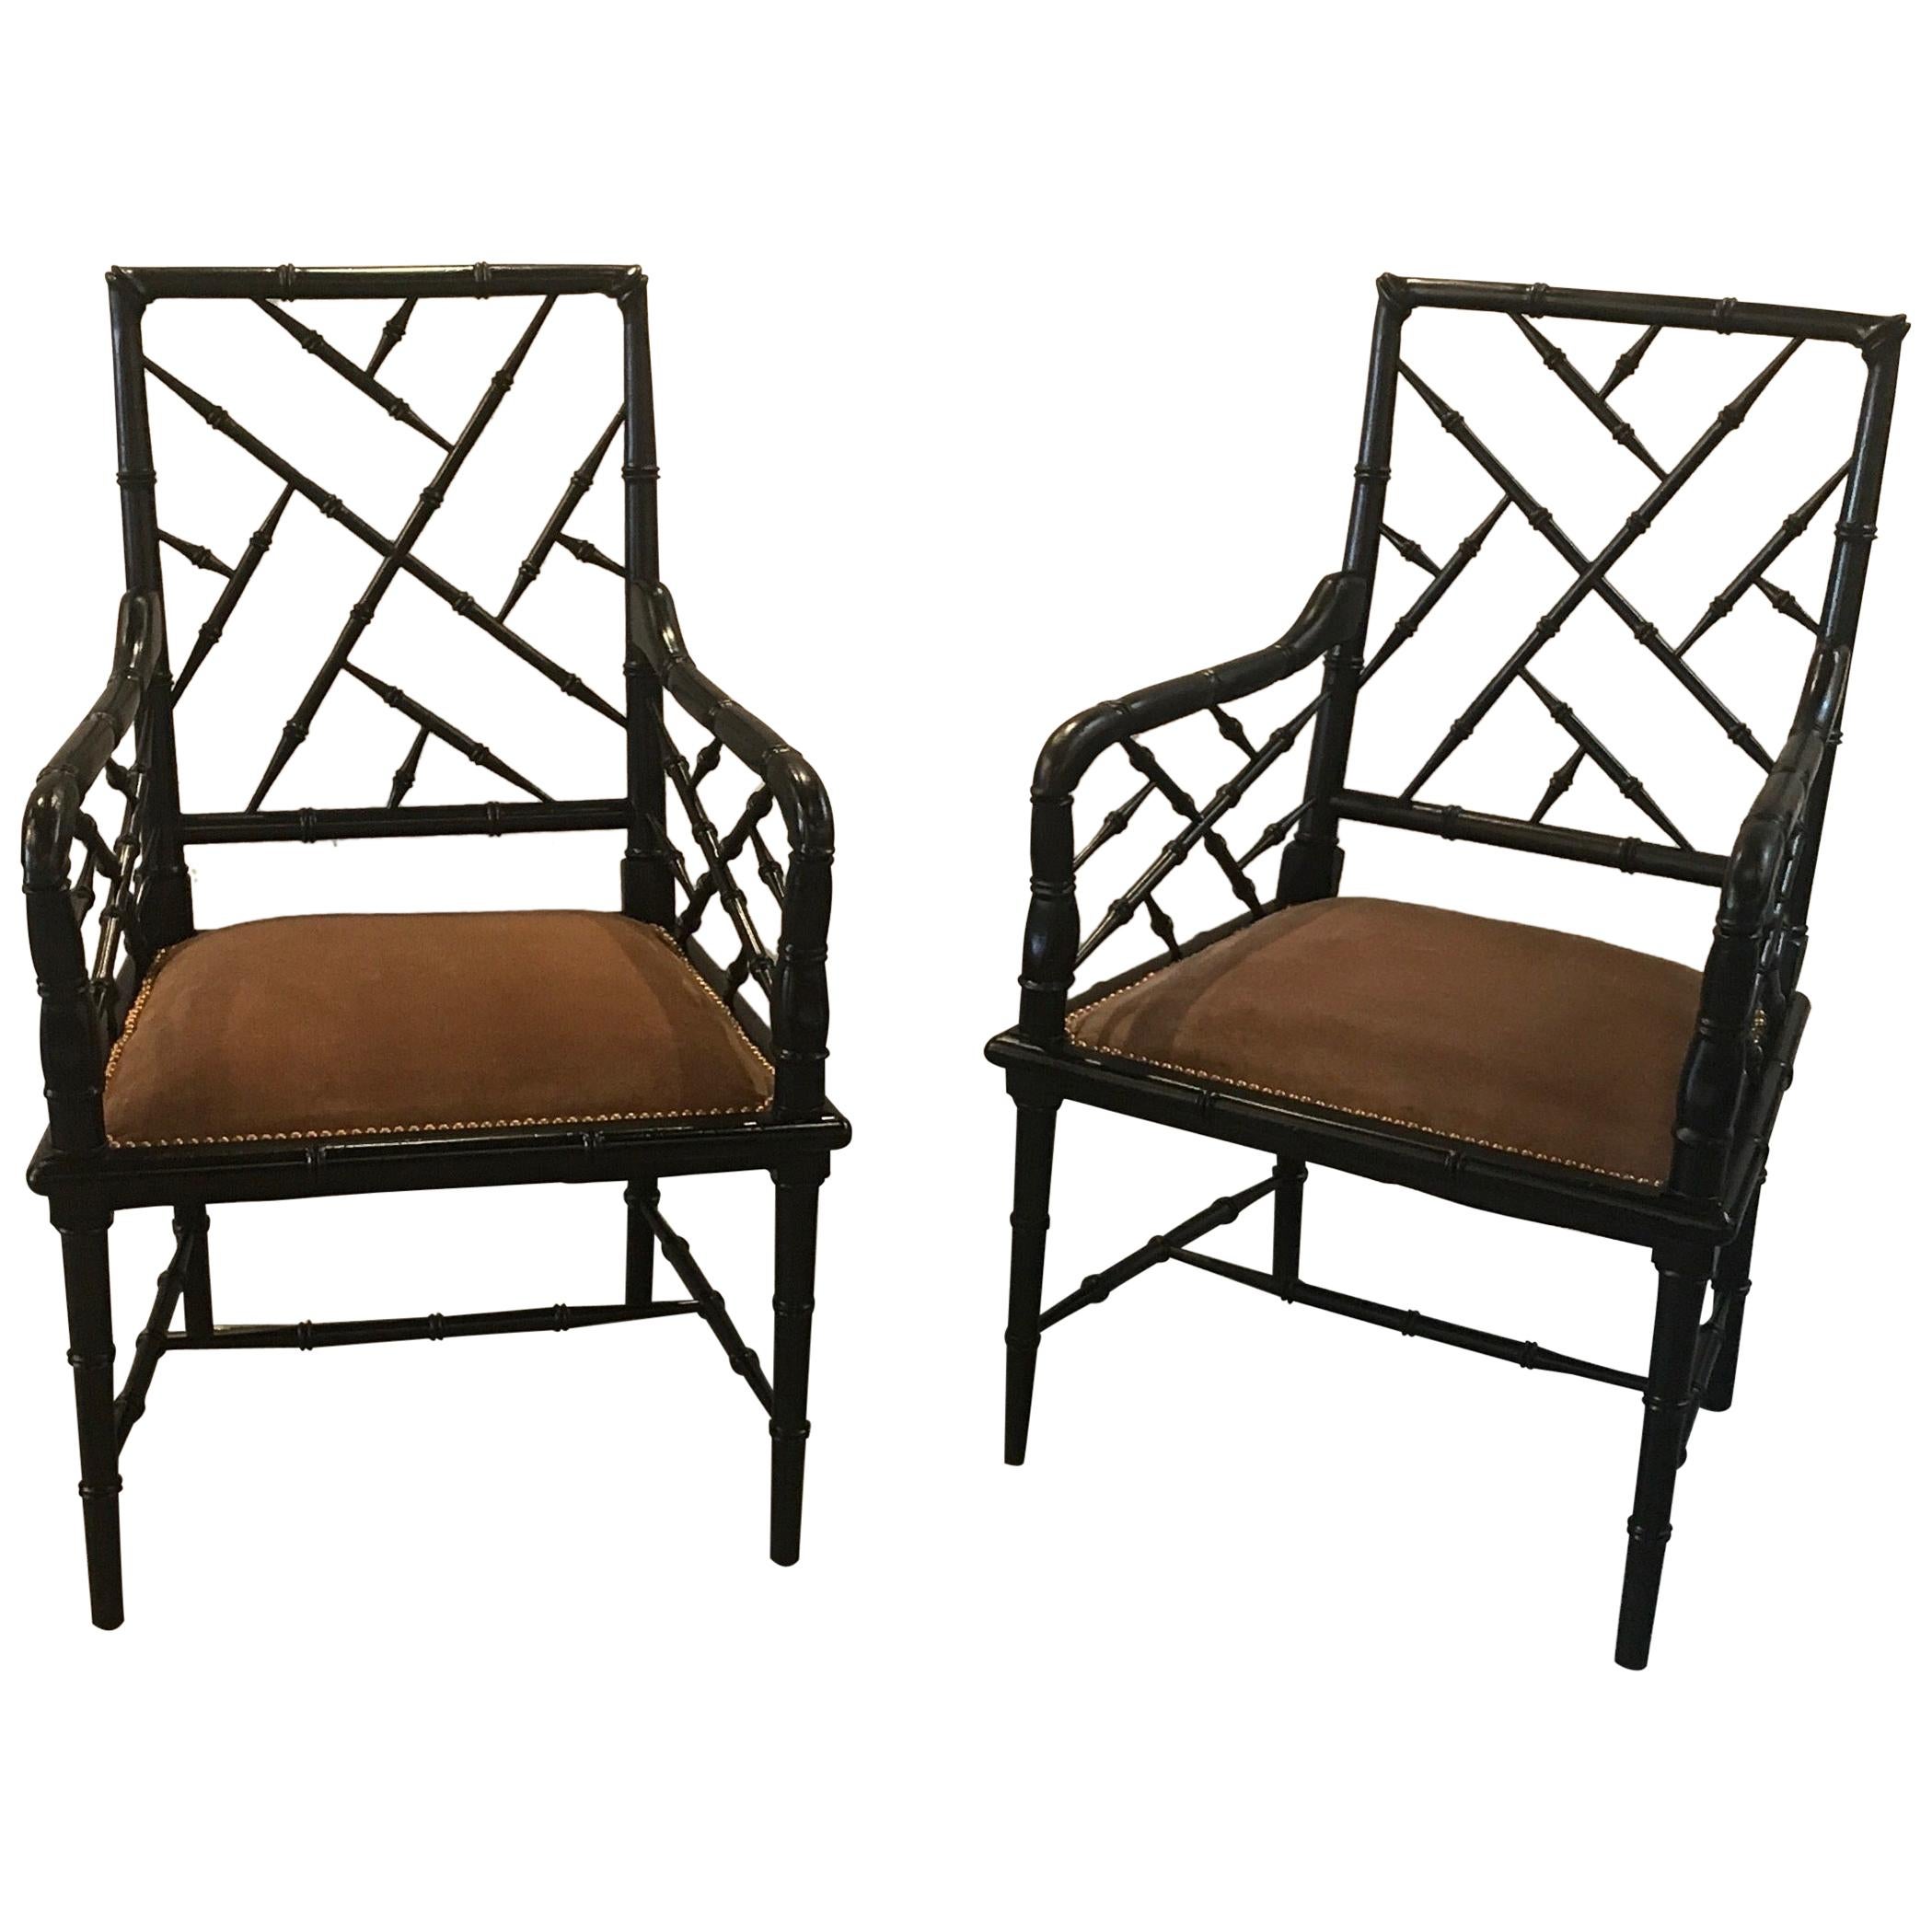 Pair of Hollywood Regency Ebonized Wood Accent Chairs